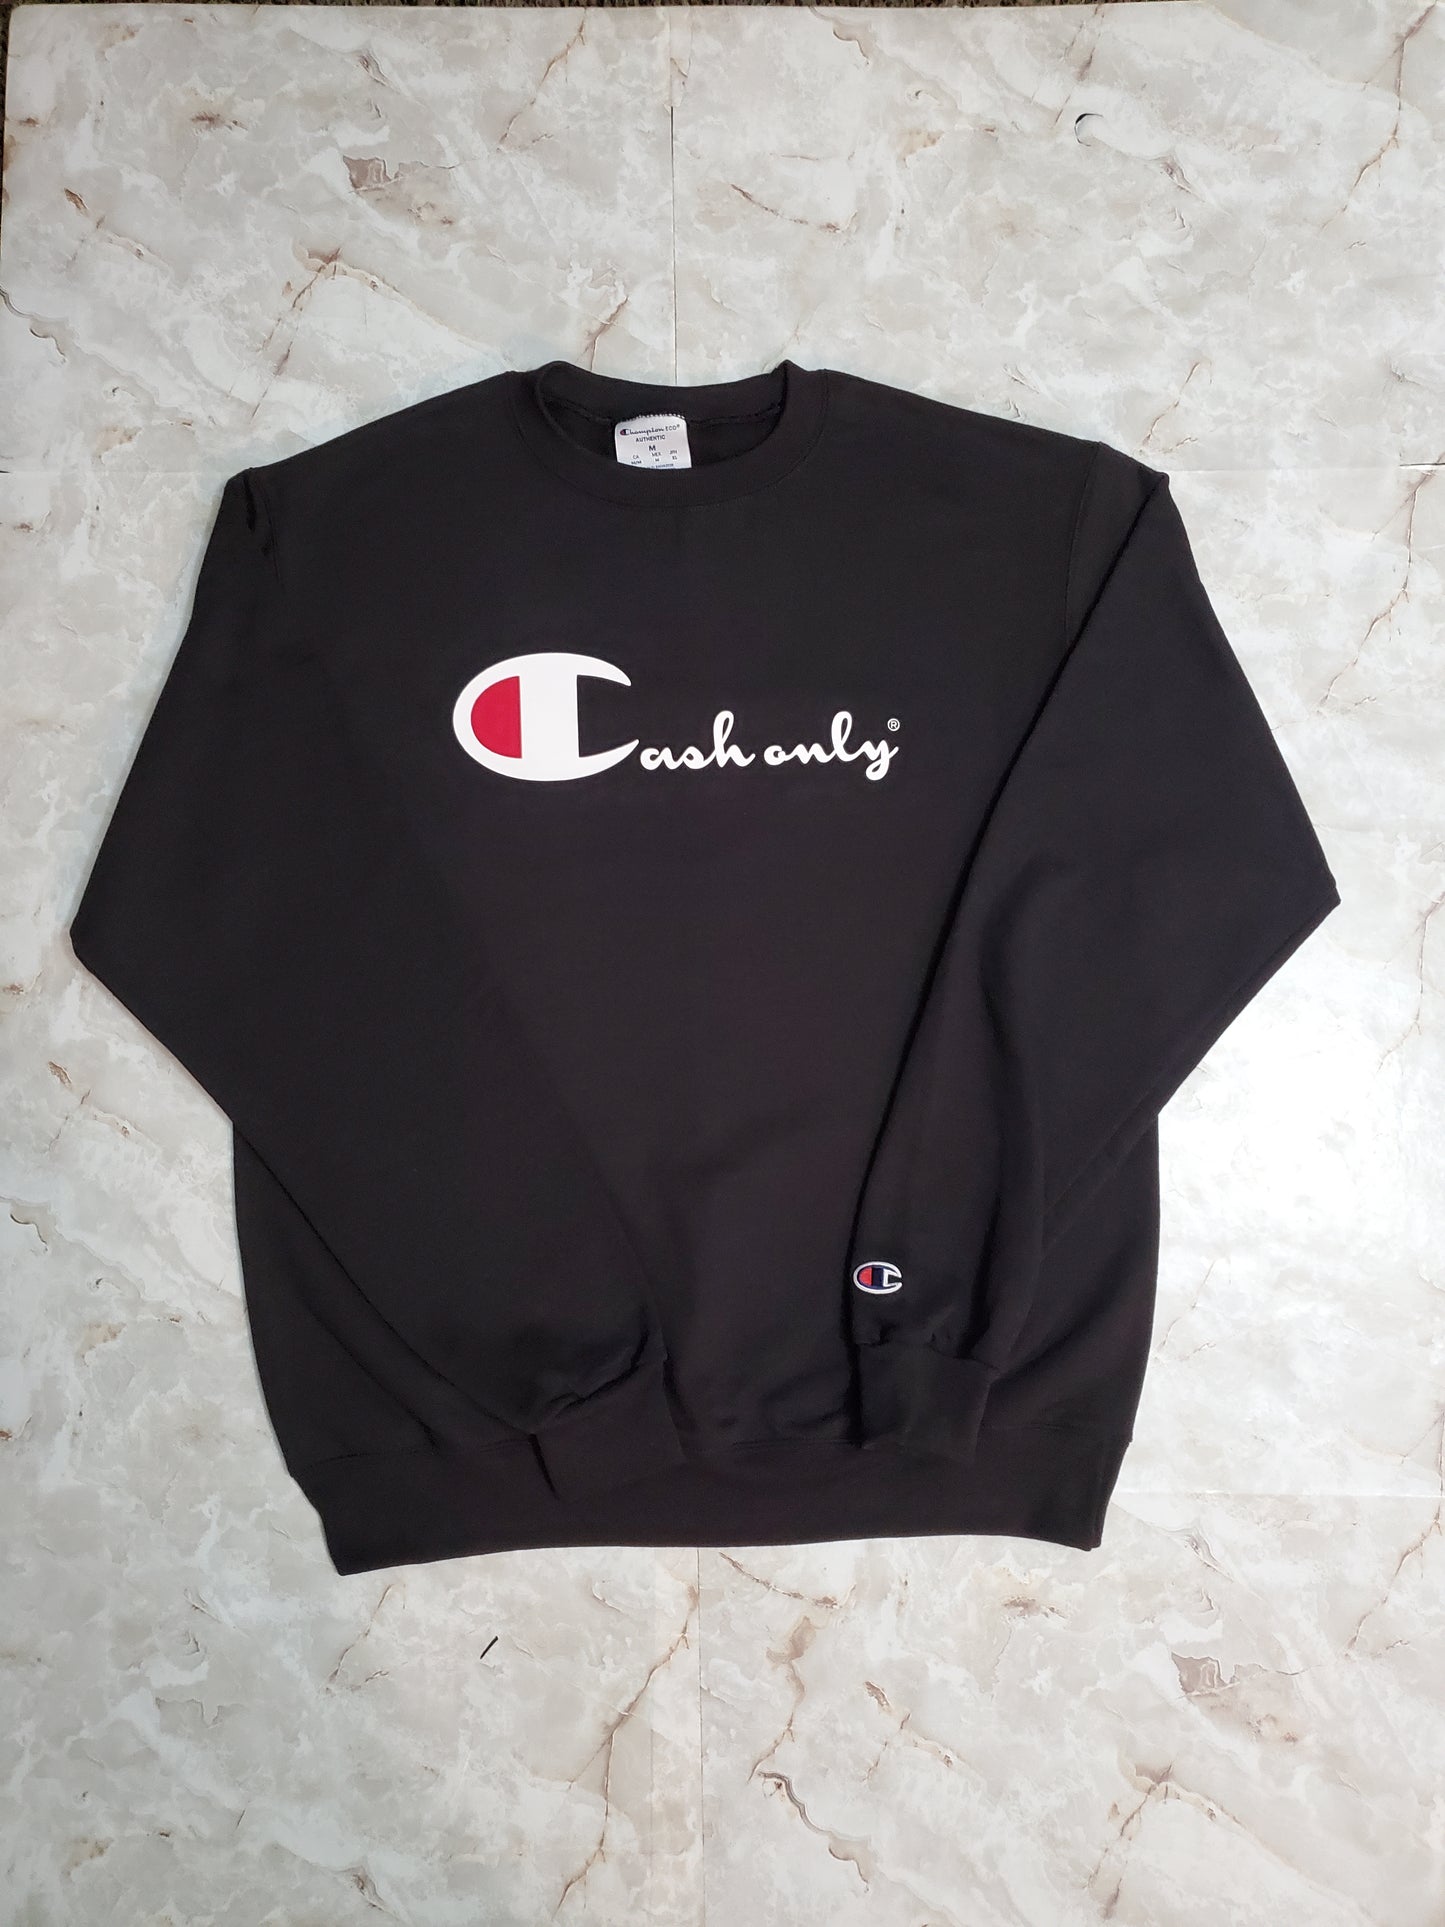 Cash Only Sweatshirt - Centre Ave Clothing Co.